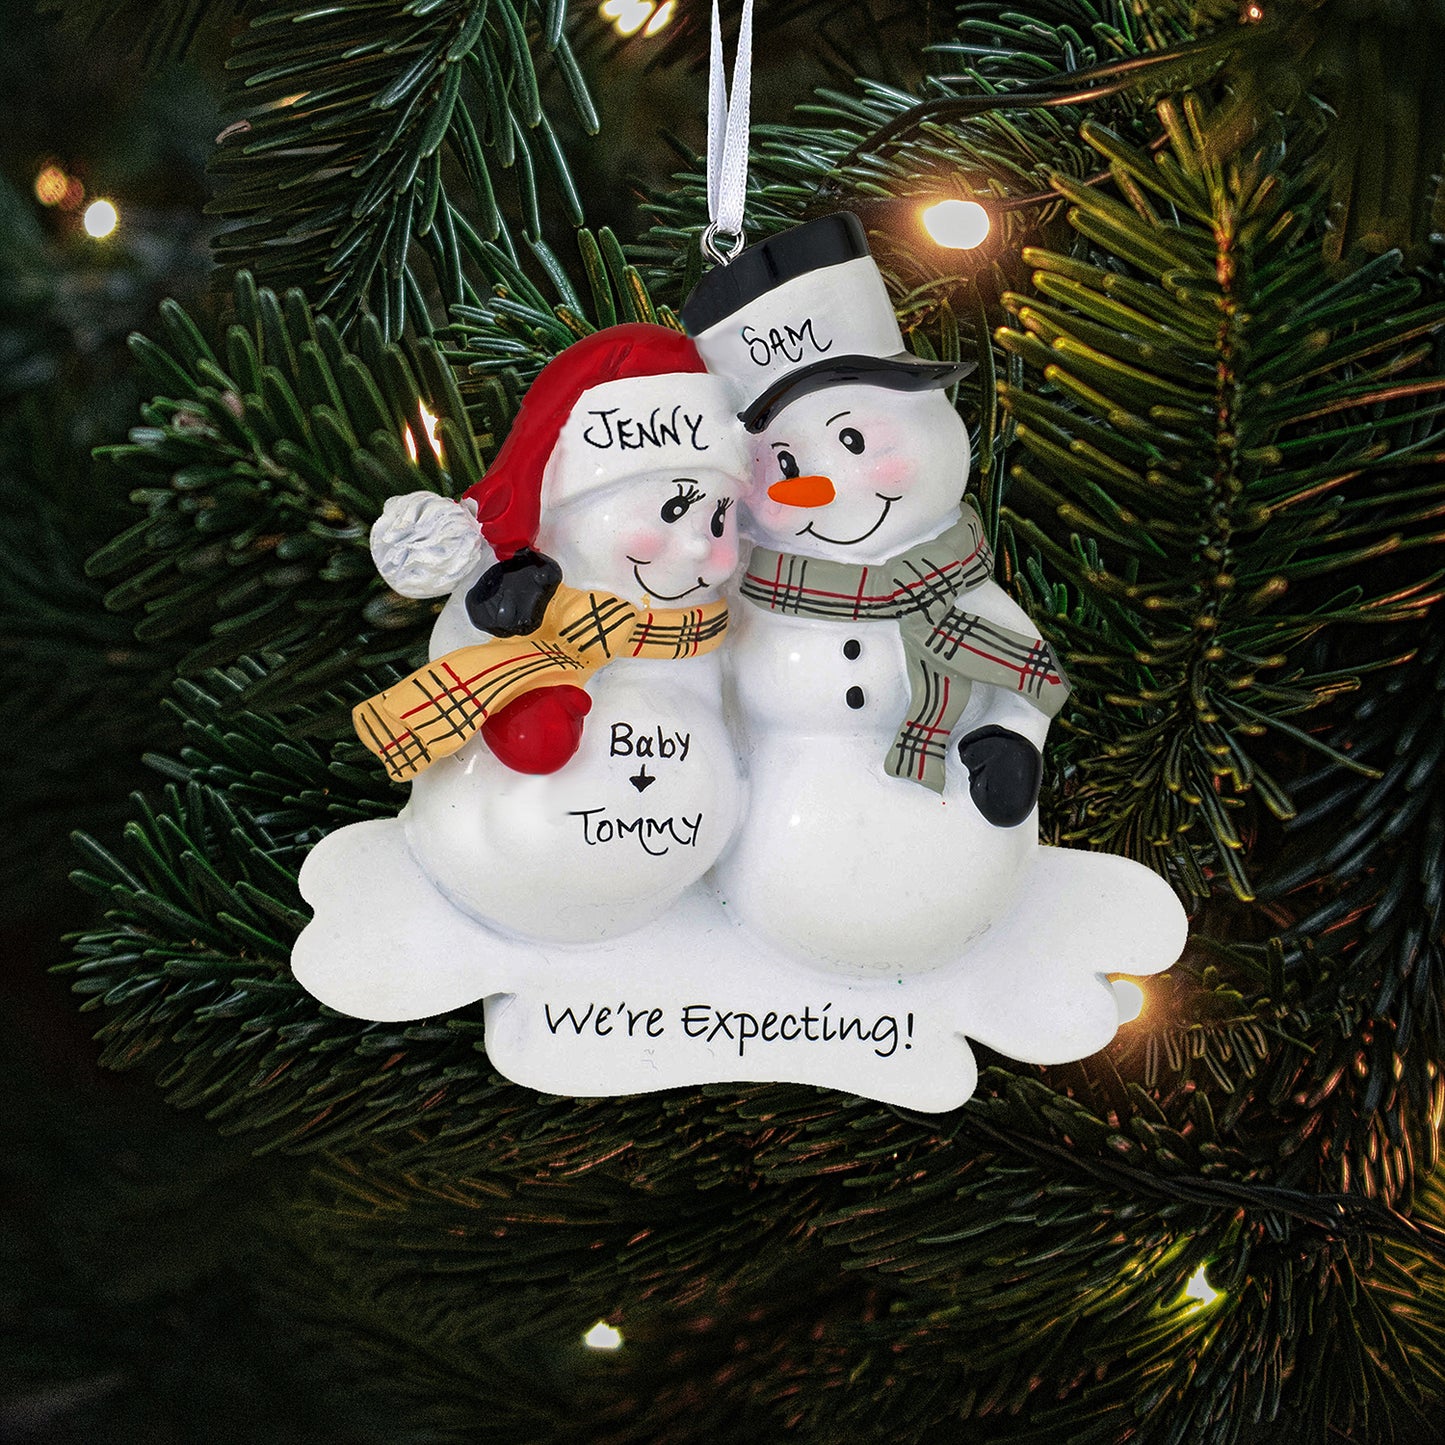 A charming Christmas tree ornament featuring two snowpeople with the names 'Jenny' and 'Sam' written on them, and 'Baby Tommy' on the female snowperson's stomach below, highlighting the ability to personalise these ornaments. The snowmen are smiling and dressed in festive attire with the announcement 'We're Expecting!' inscribed at the bottom.